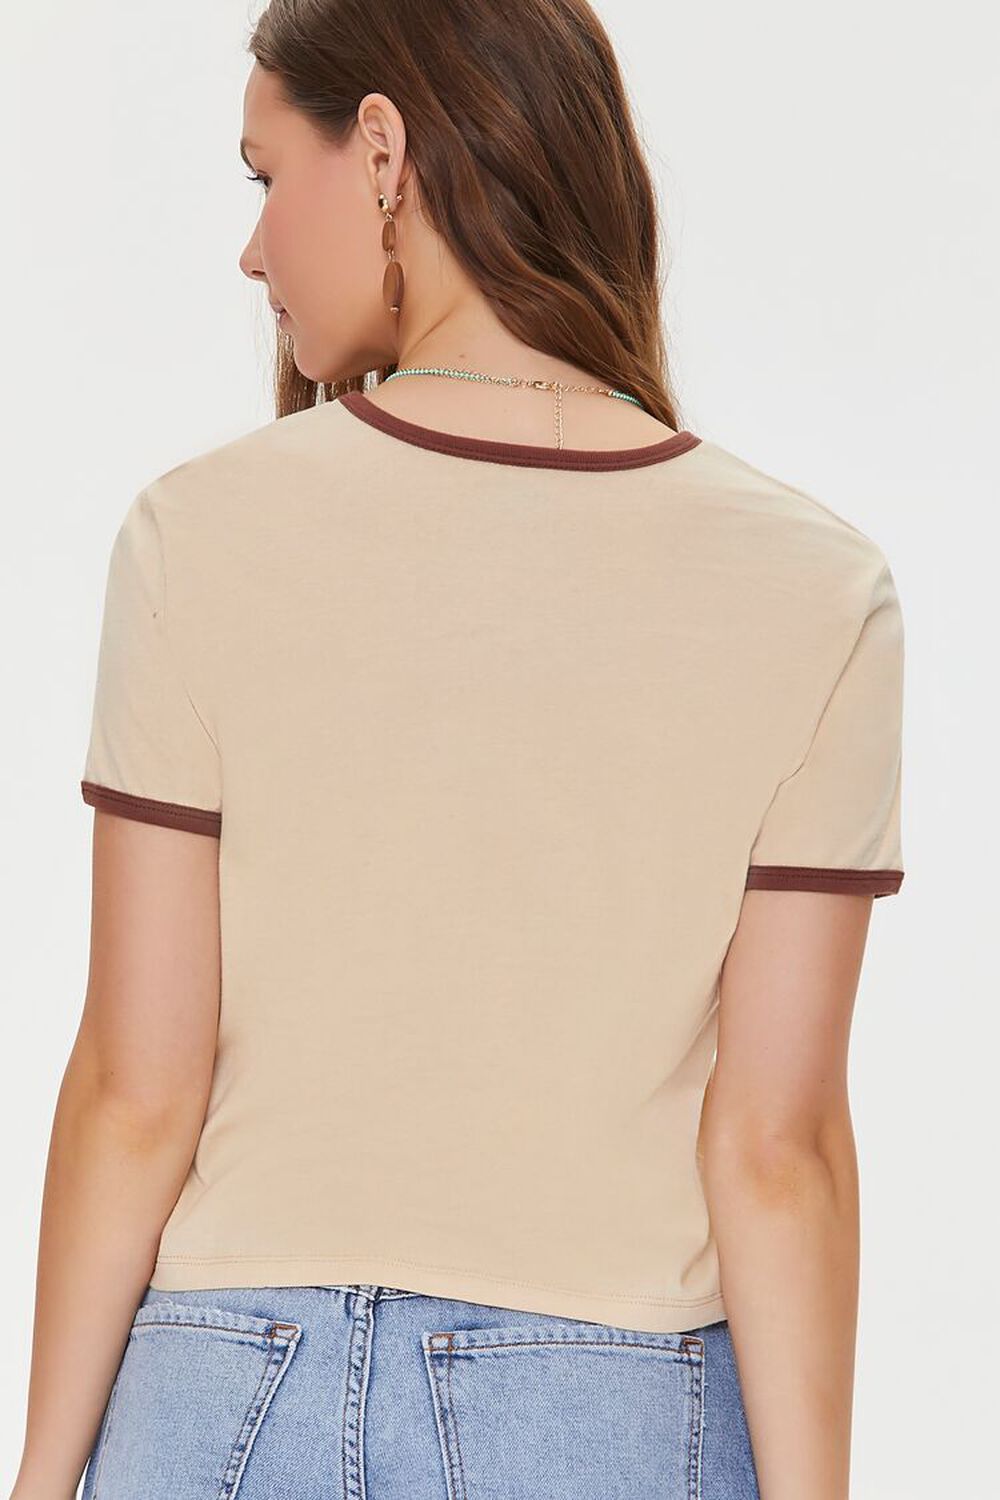 BROWN/MULTI Woodstock Graphic Cropped Ringer Tee, image 3